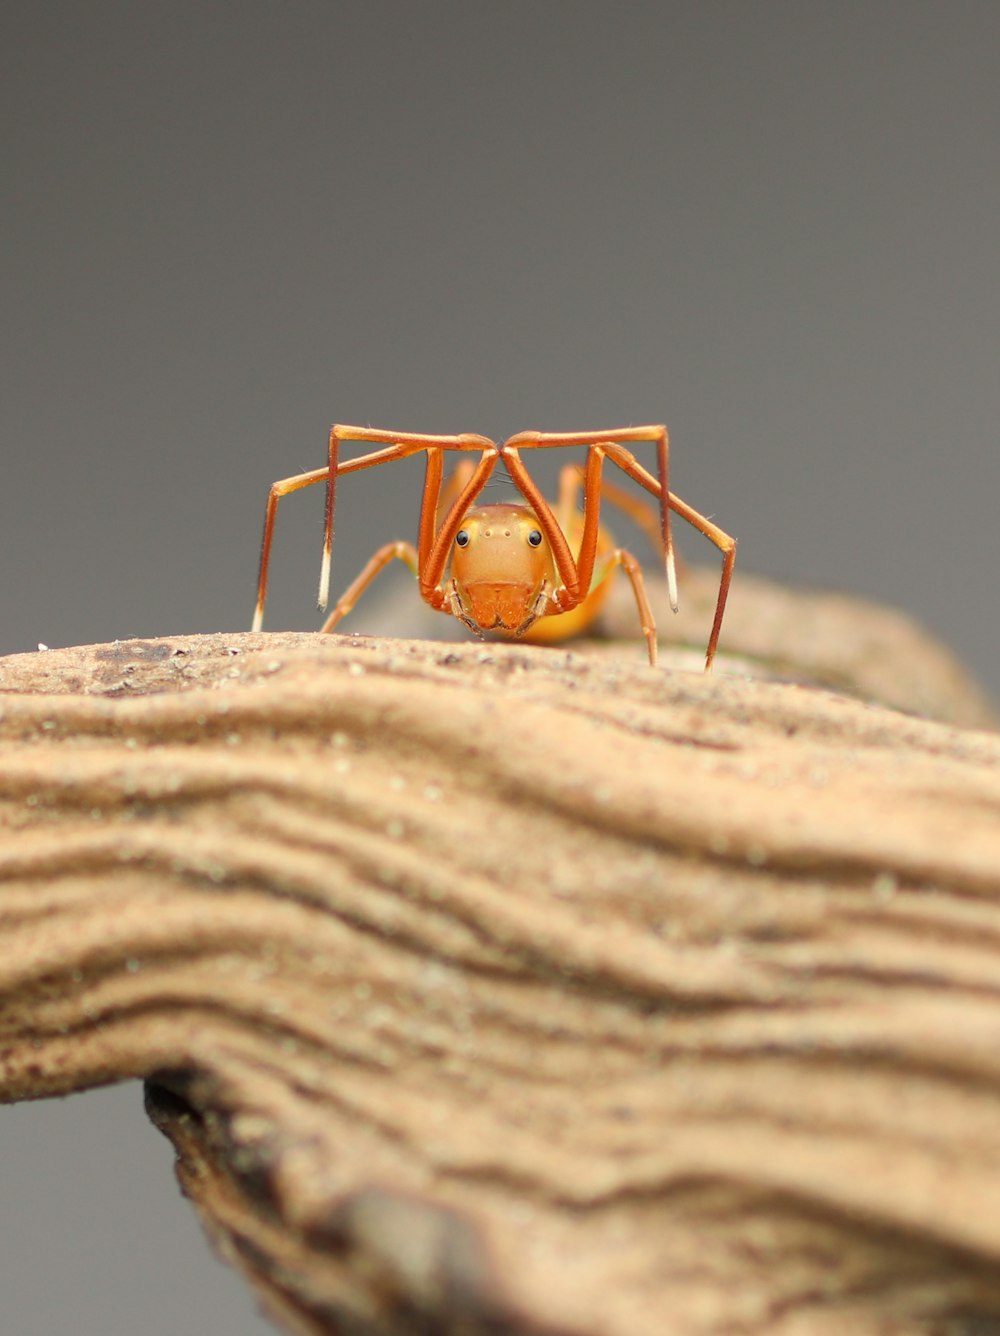 a small orange spider sitting on top of a piece of wood